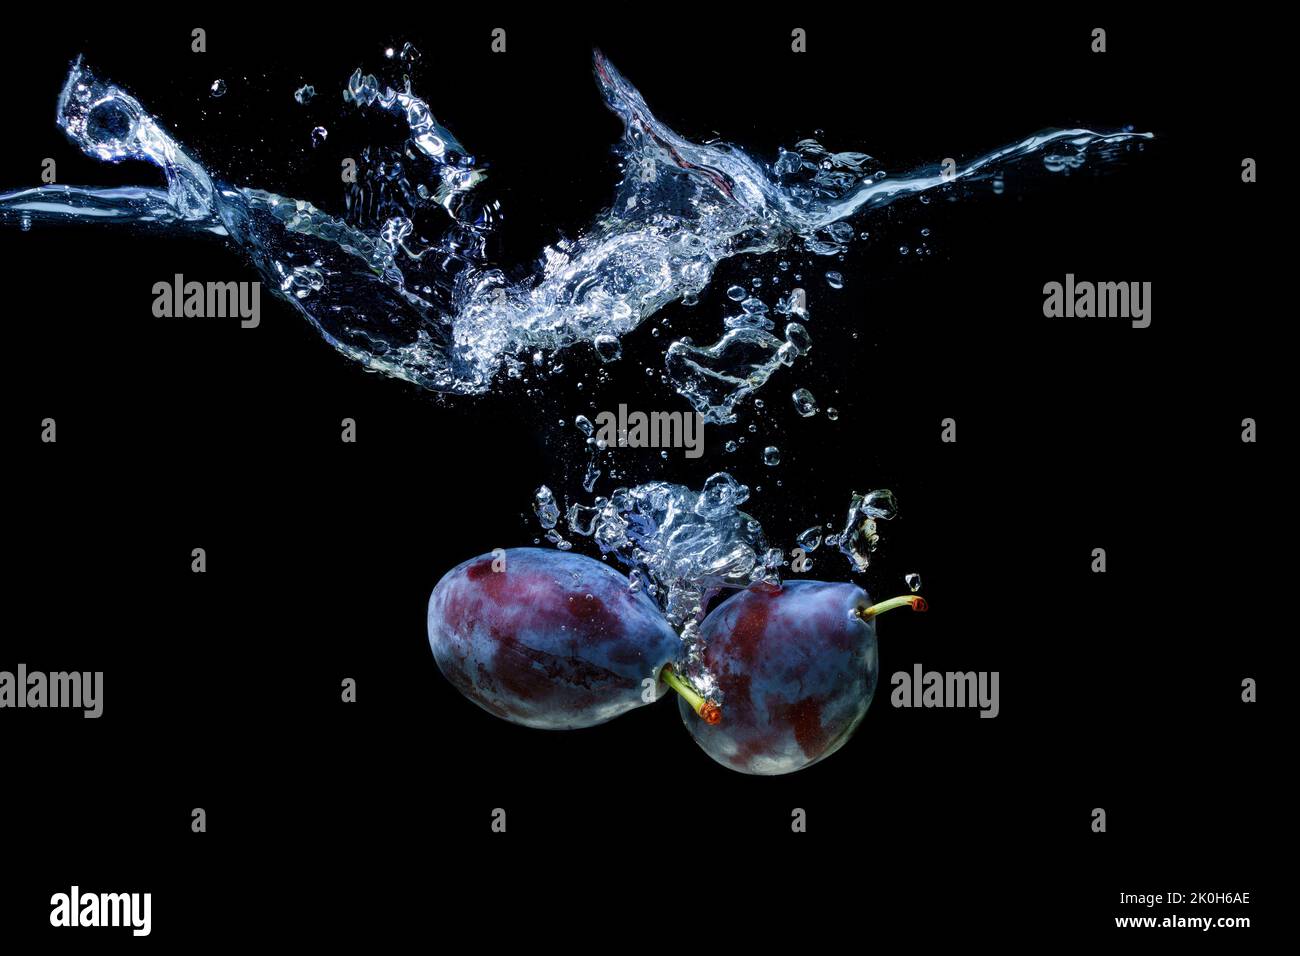 Damson plums dropped in water with splashes and waves isolated on black background. Stock Photo